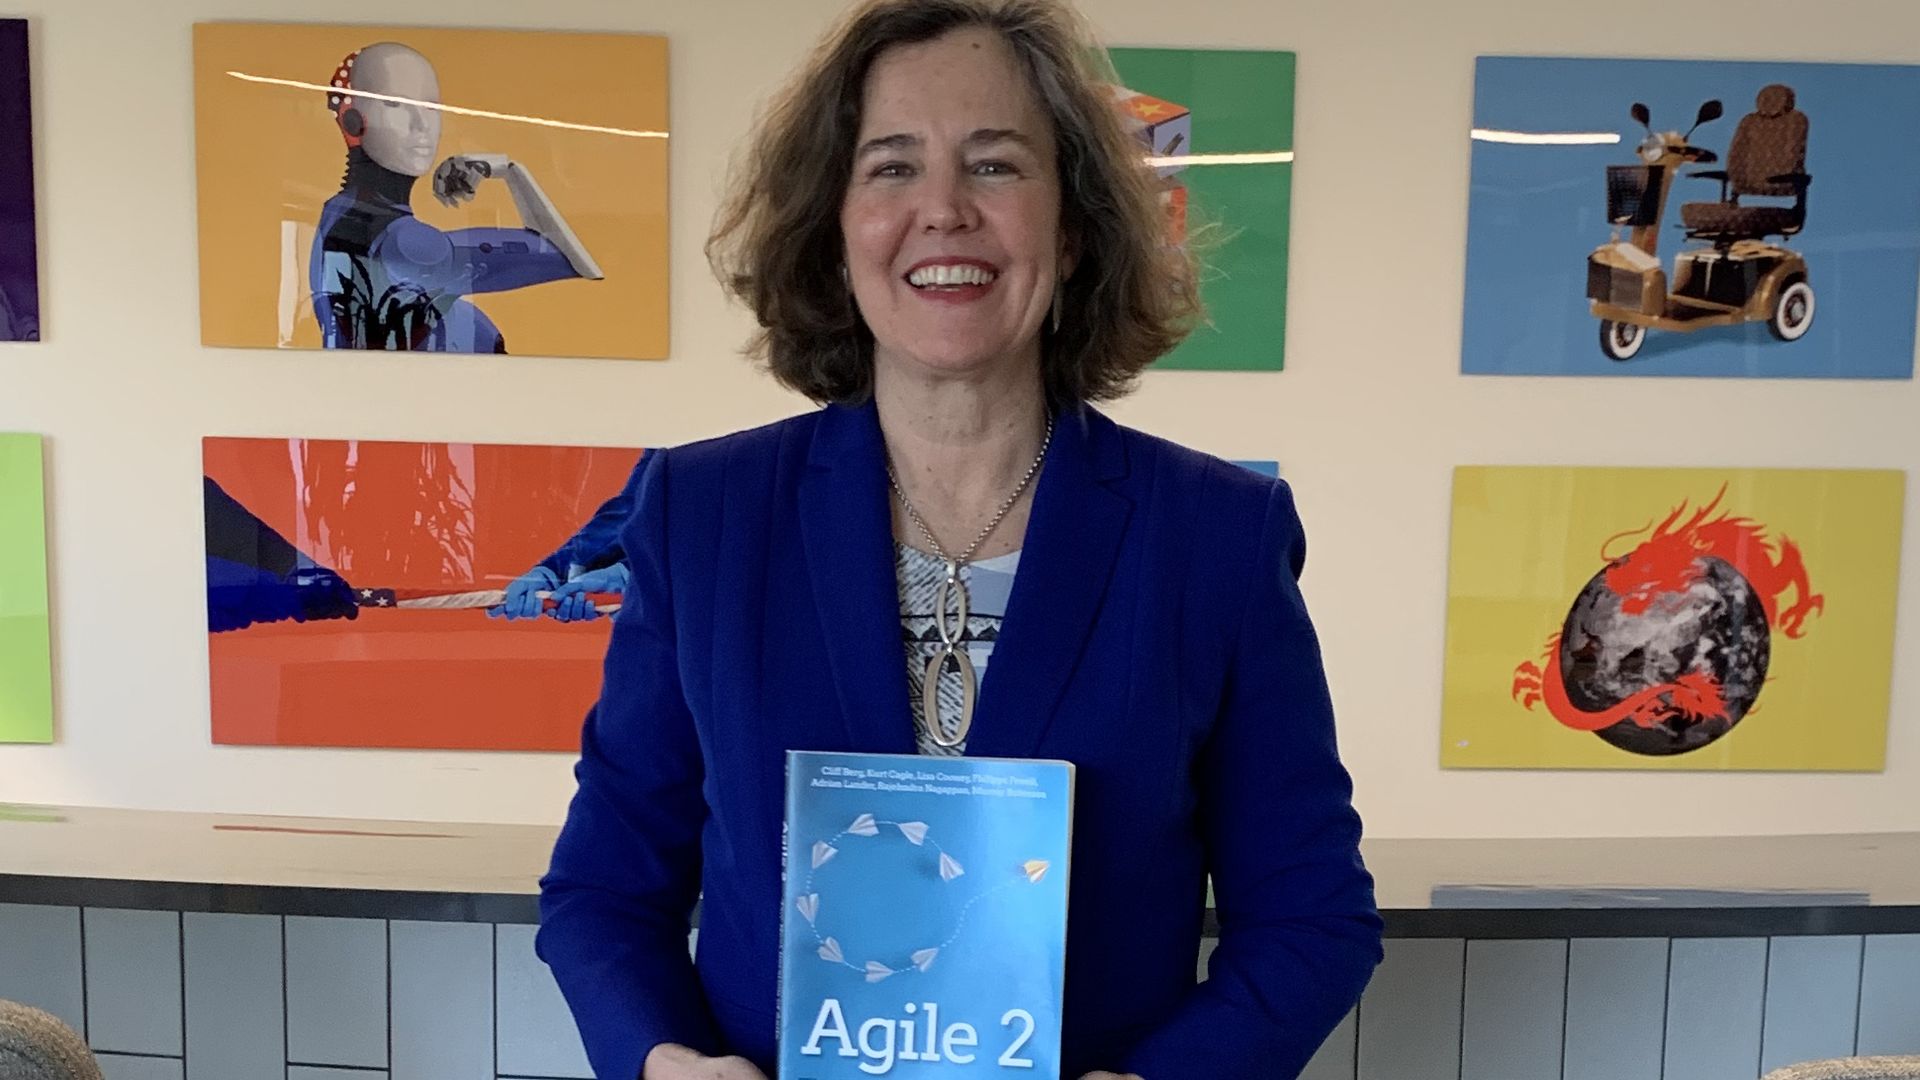 Lisa Cooney with Agile 2, the book she co-authored.